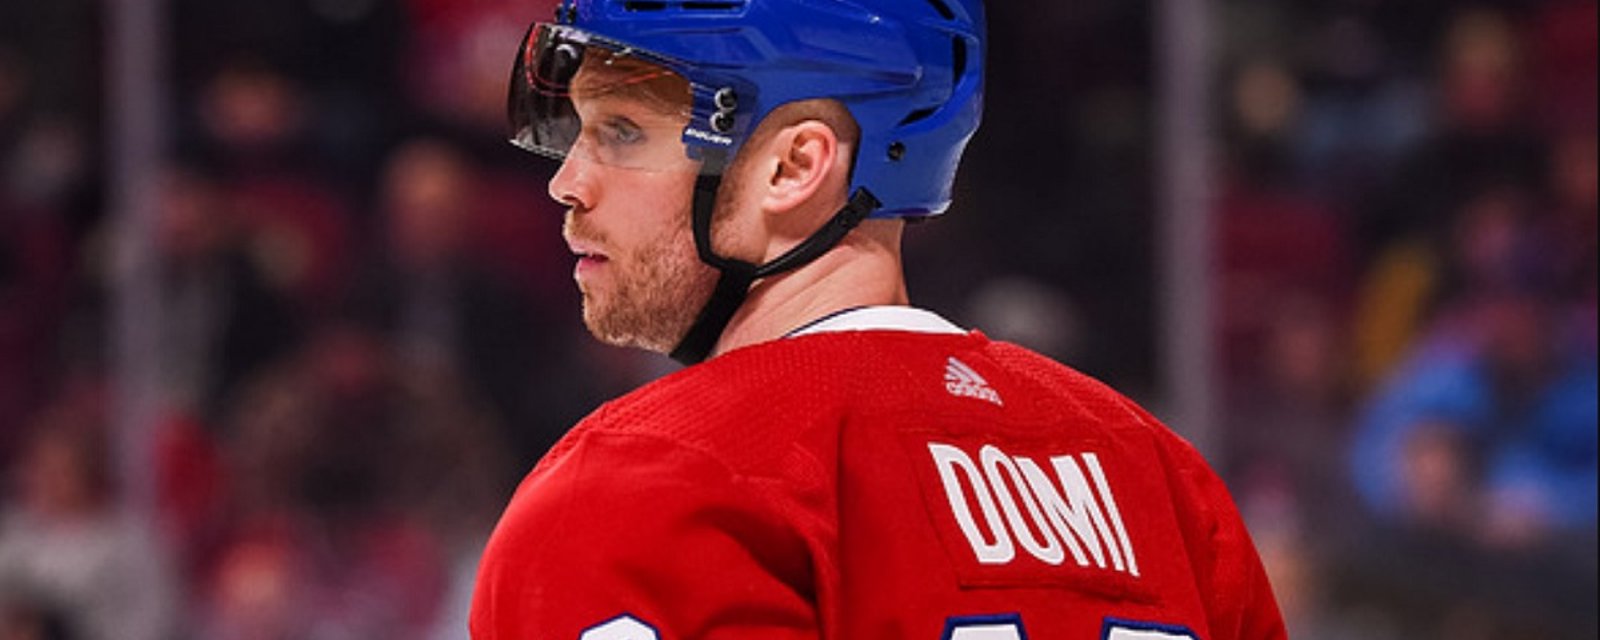 Habs release statement regarding the participation of Max Domi.